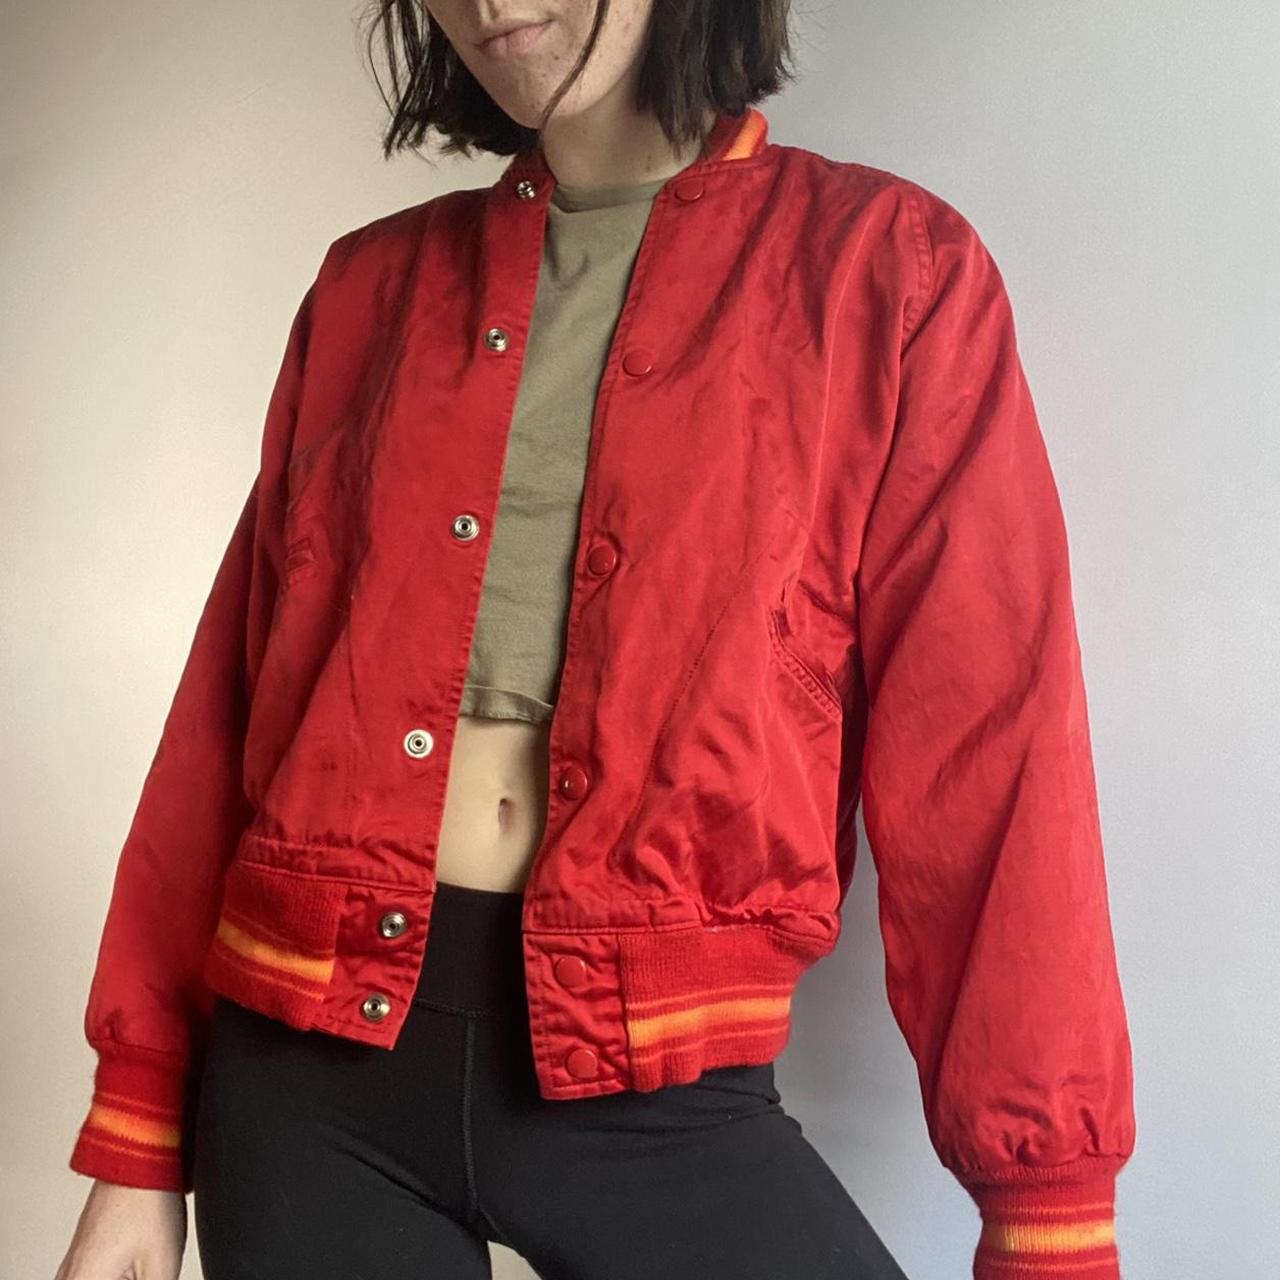 Product Image 1 - Red Bomber Jacket!

In great condition!

msg